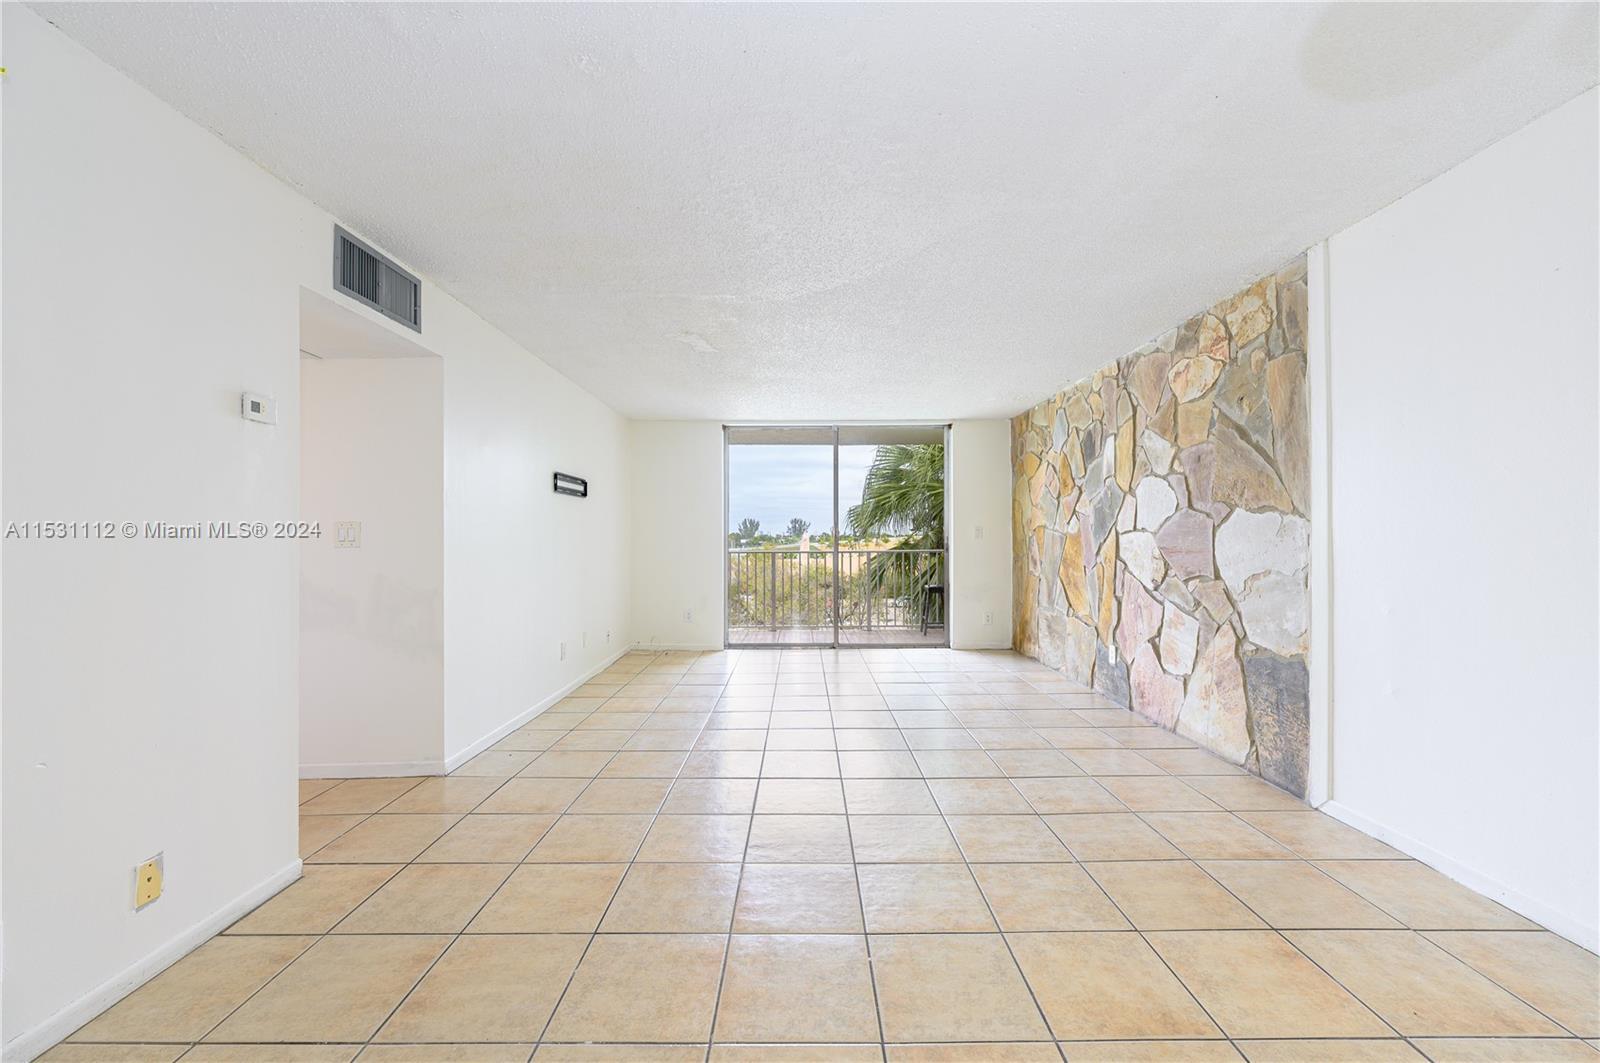 Photo of 8411 NW 8th St #405 in Miami, FL